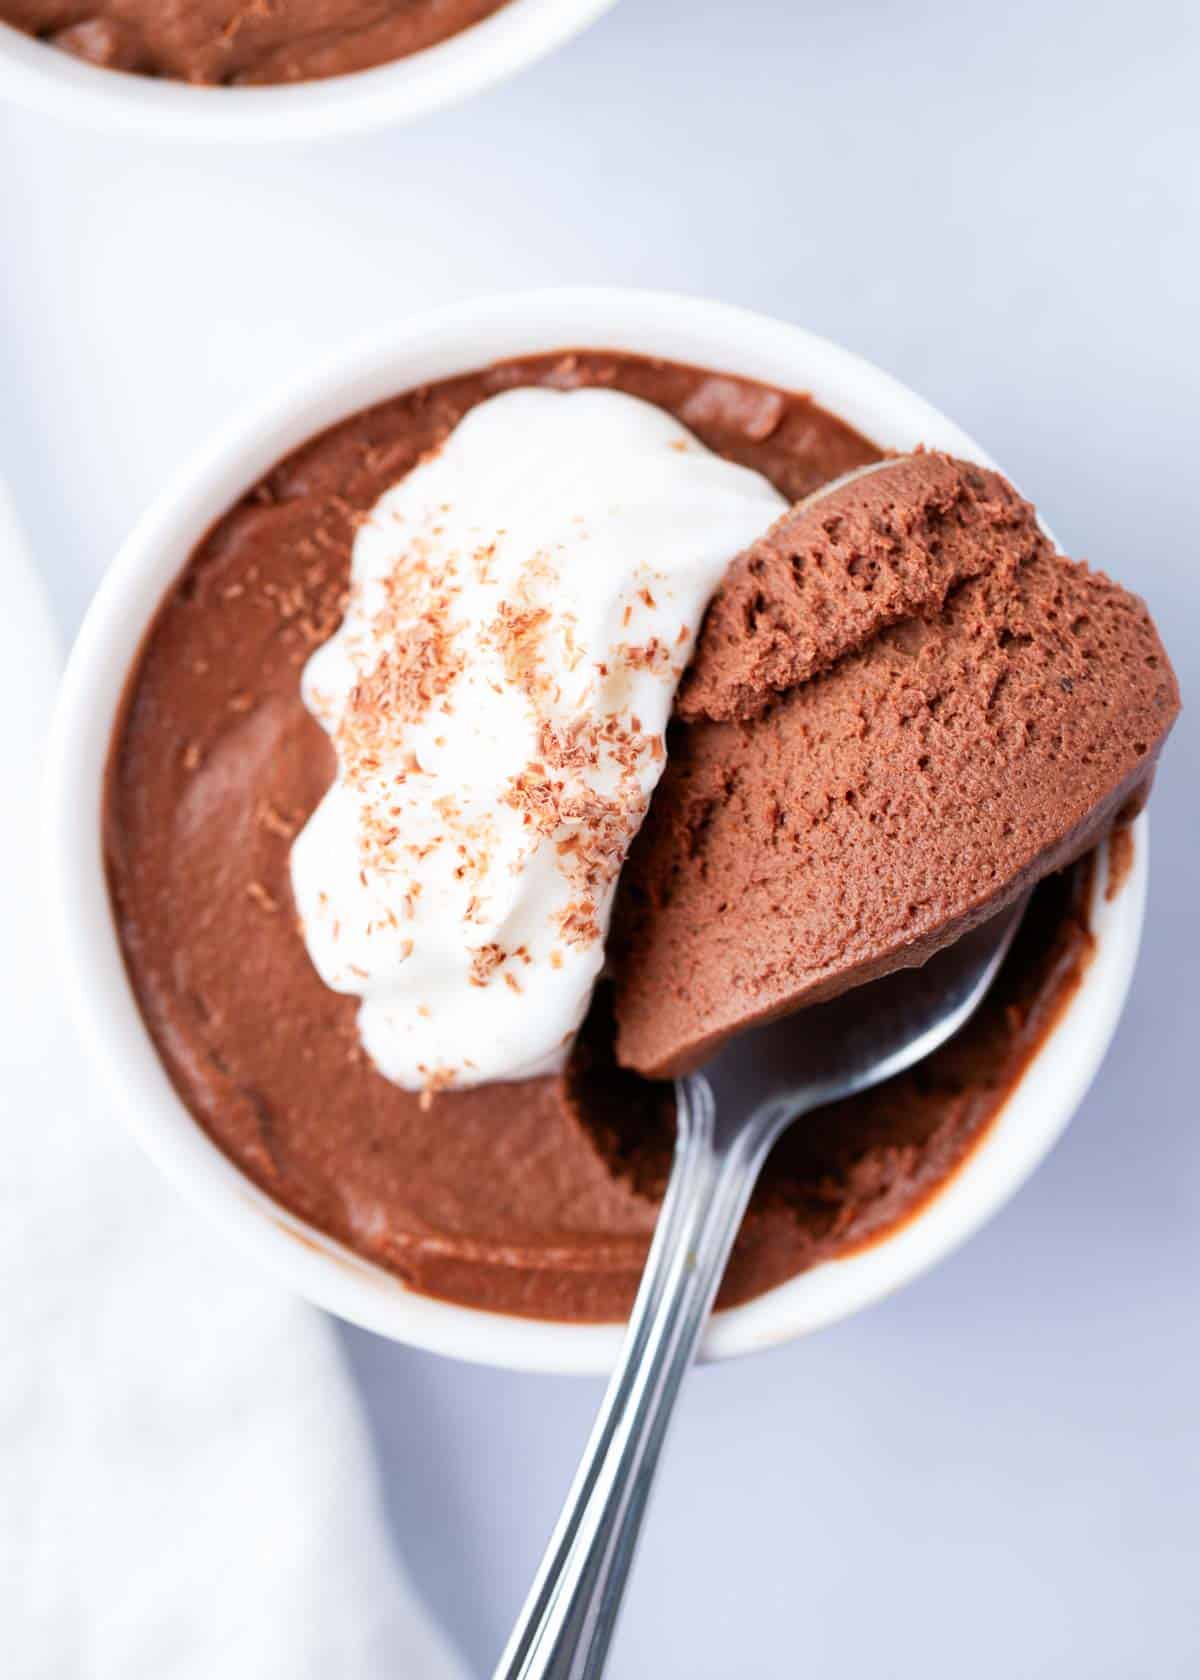 Spoonful of chocolate mousse.